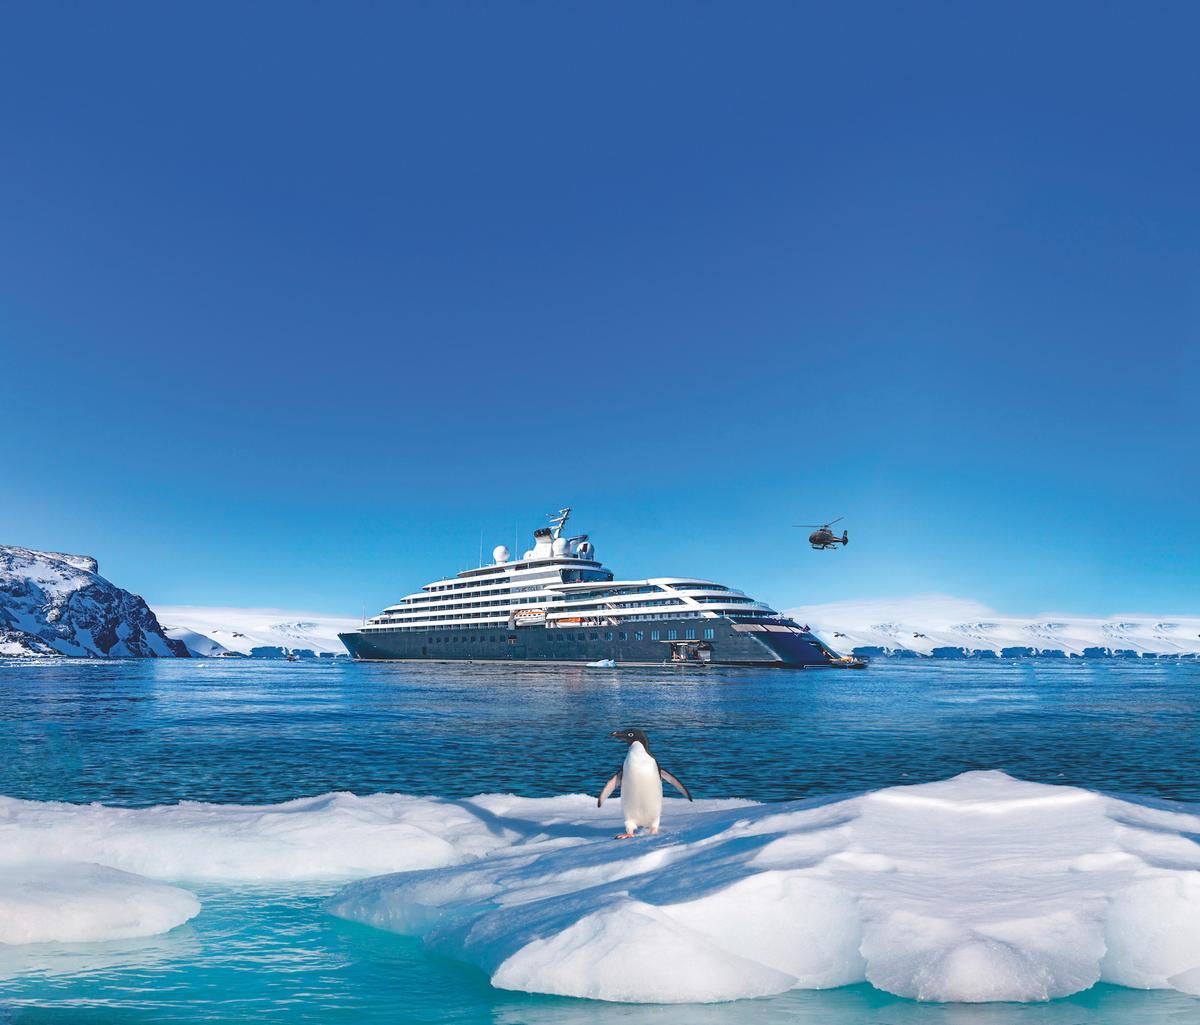 Exploring Antarctica with the luxury “discovery yacht” Scenic Eclipse gives you the options of perspectives from below—via the Scenic Neptune submarine—and above—via its helicopters. (Courtesy of Scenic)